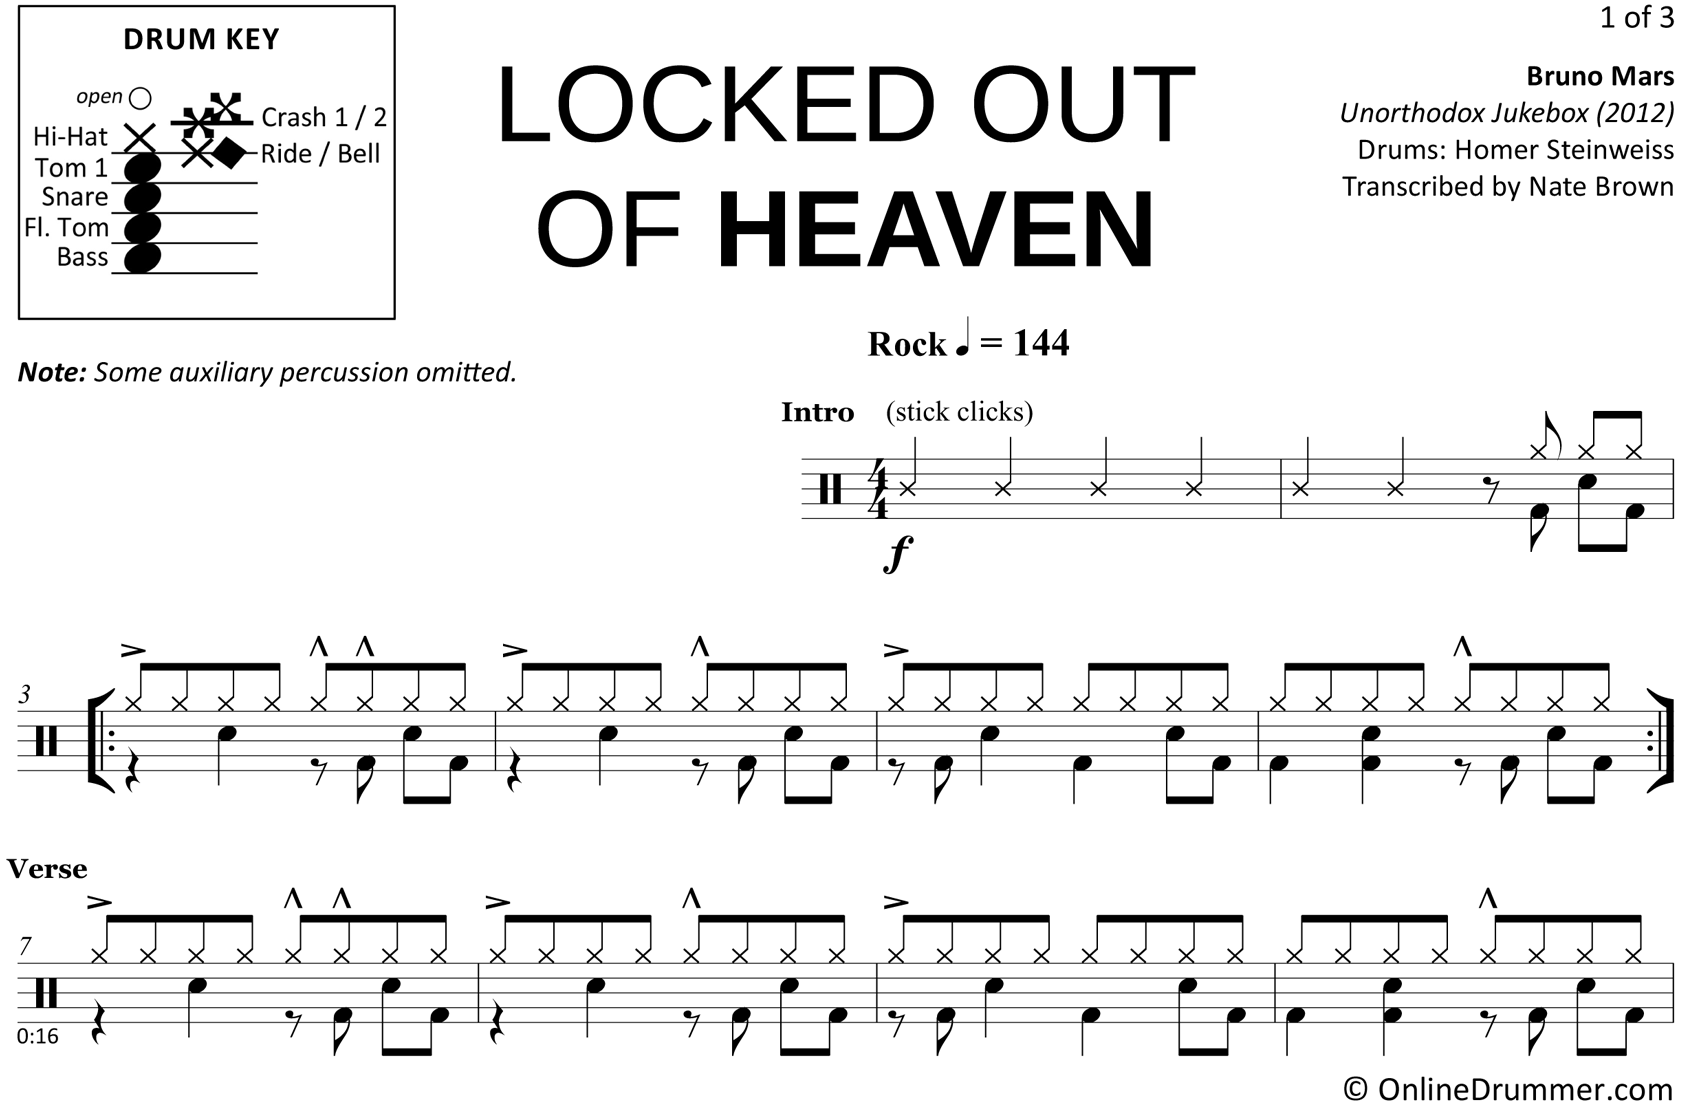 Locked Out of Heaven - Bruno Mars - Drum Sheet Music